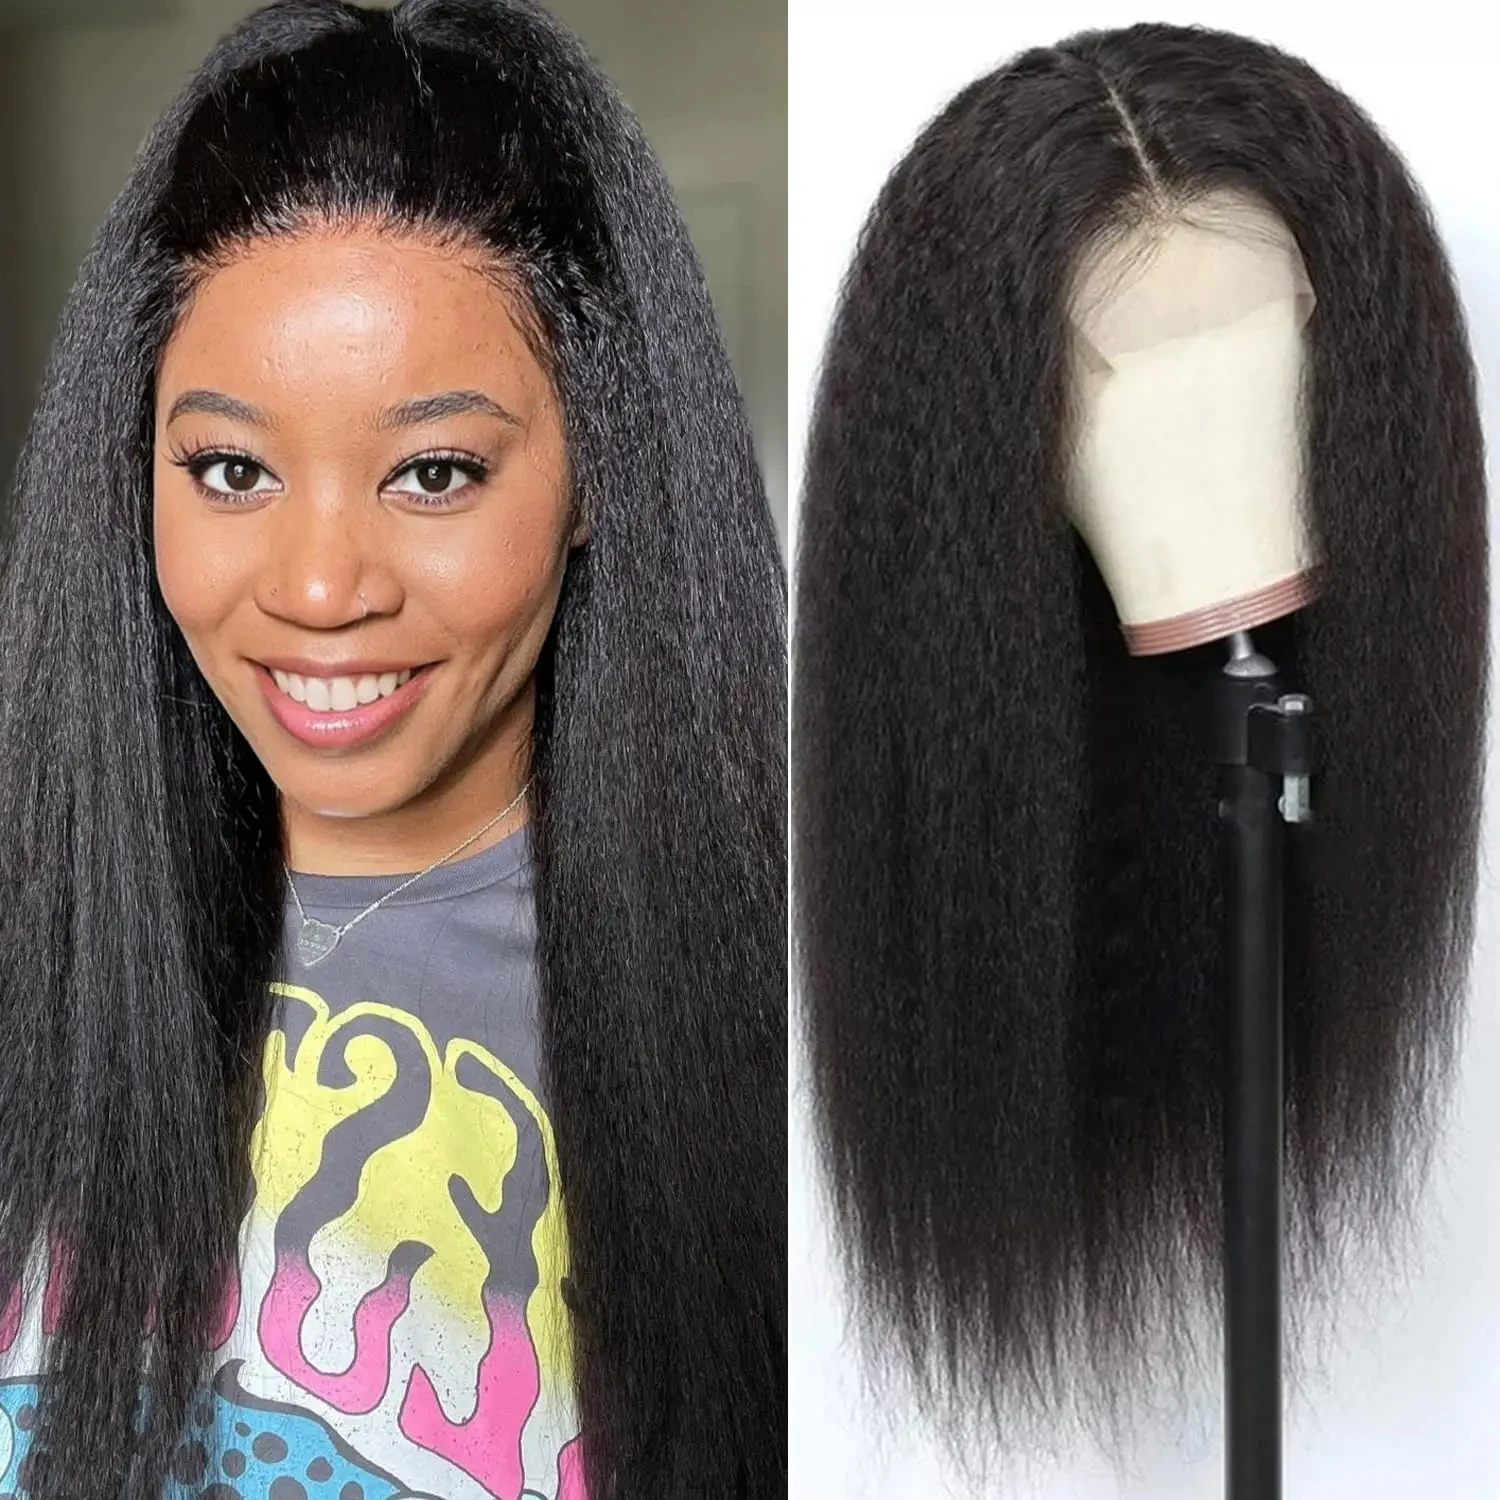 

Kinky Straight Lace Front Wigs Human Hair 250% Density 13x4 Glueless Wigs for Women 22 inch Yaki Straight Wigs Pre Plucked Hair